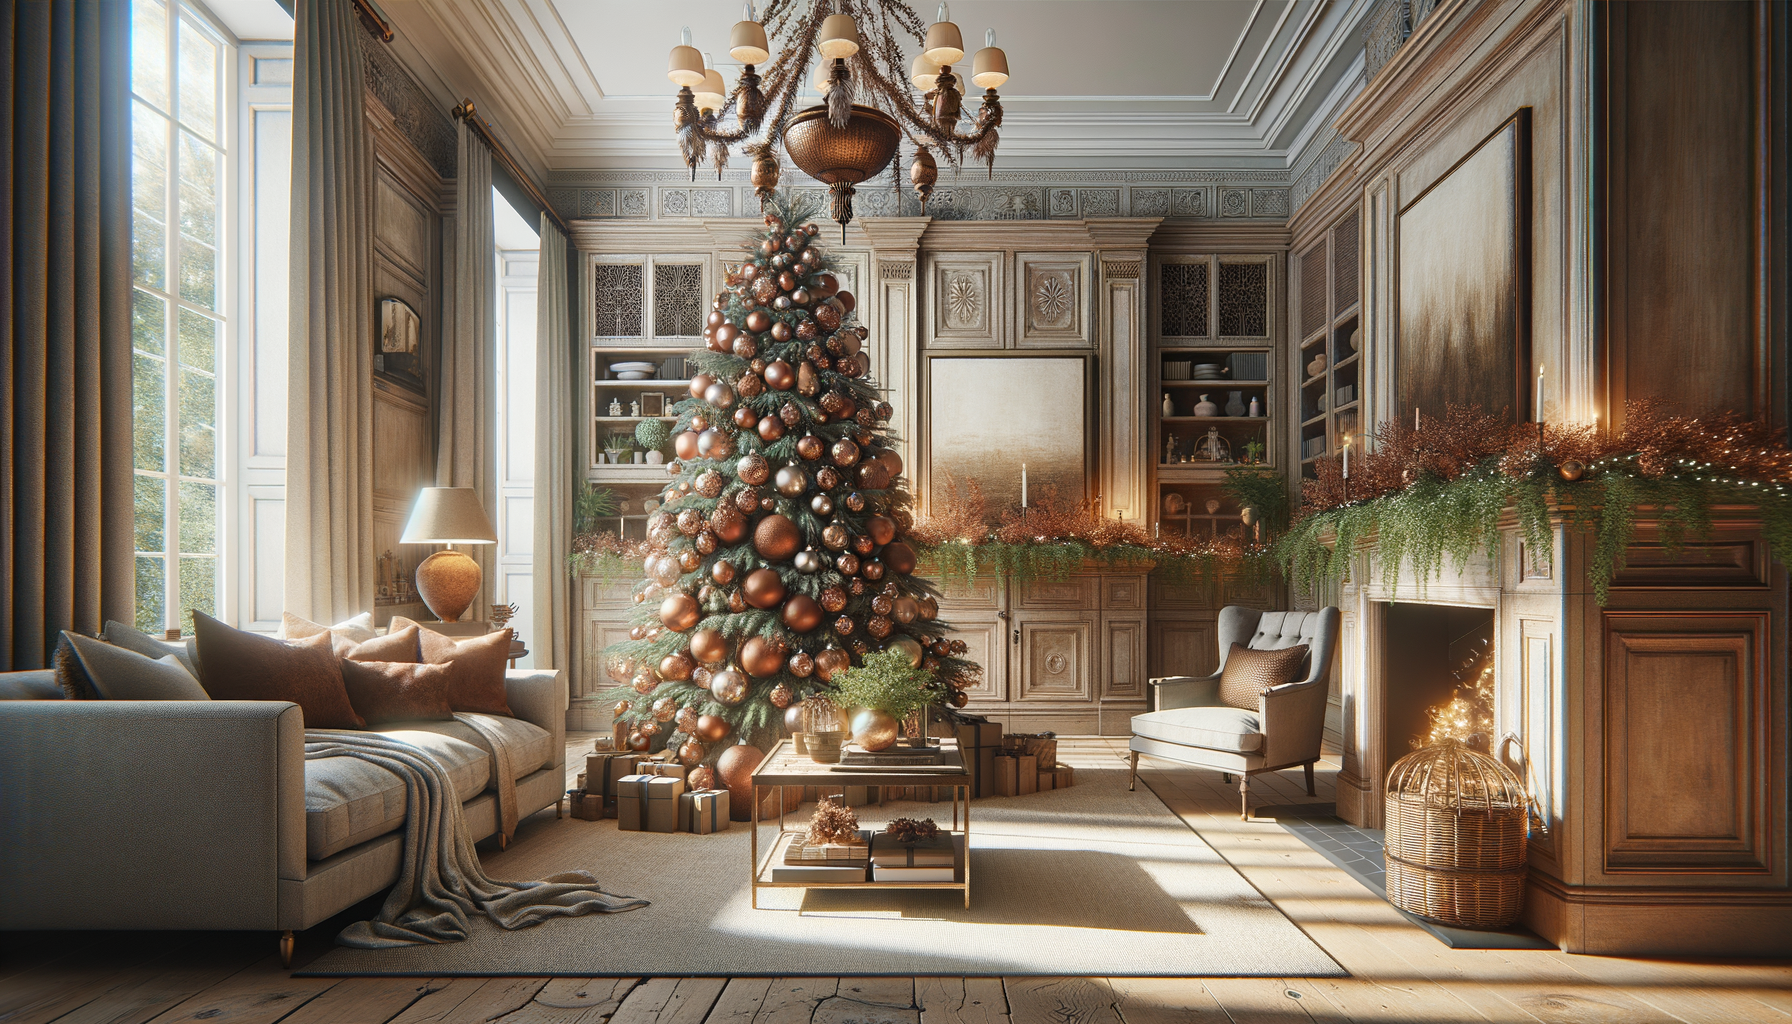 Living room with a large Christmas tree covered in rustic brown and copper ornaments.